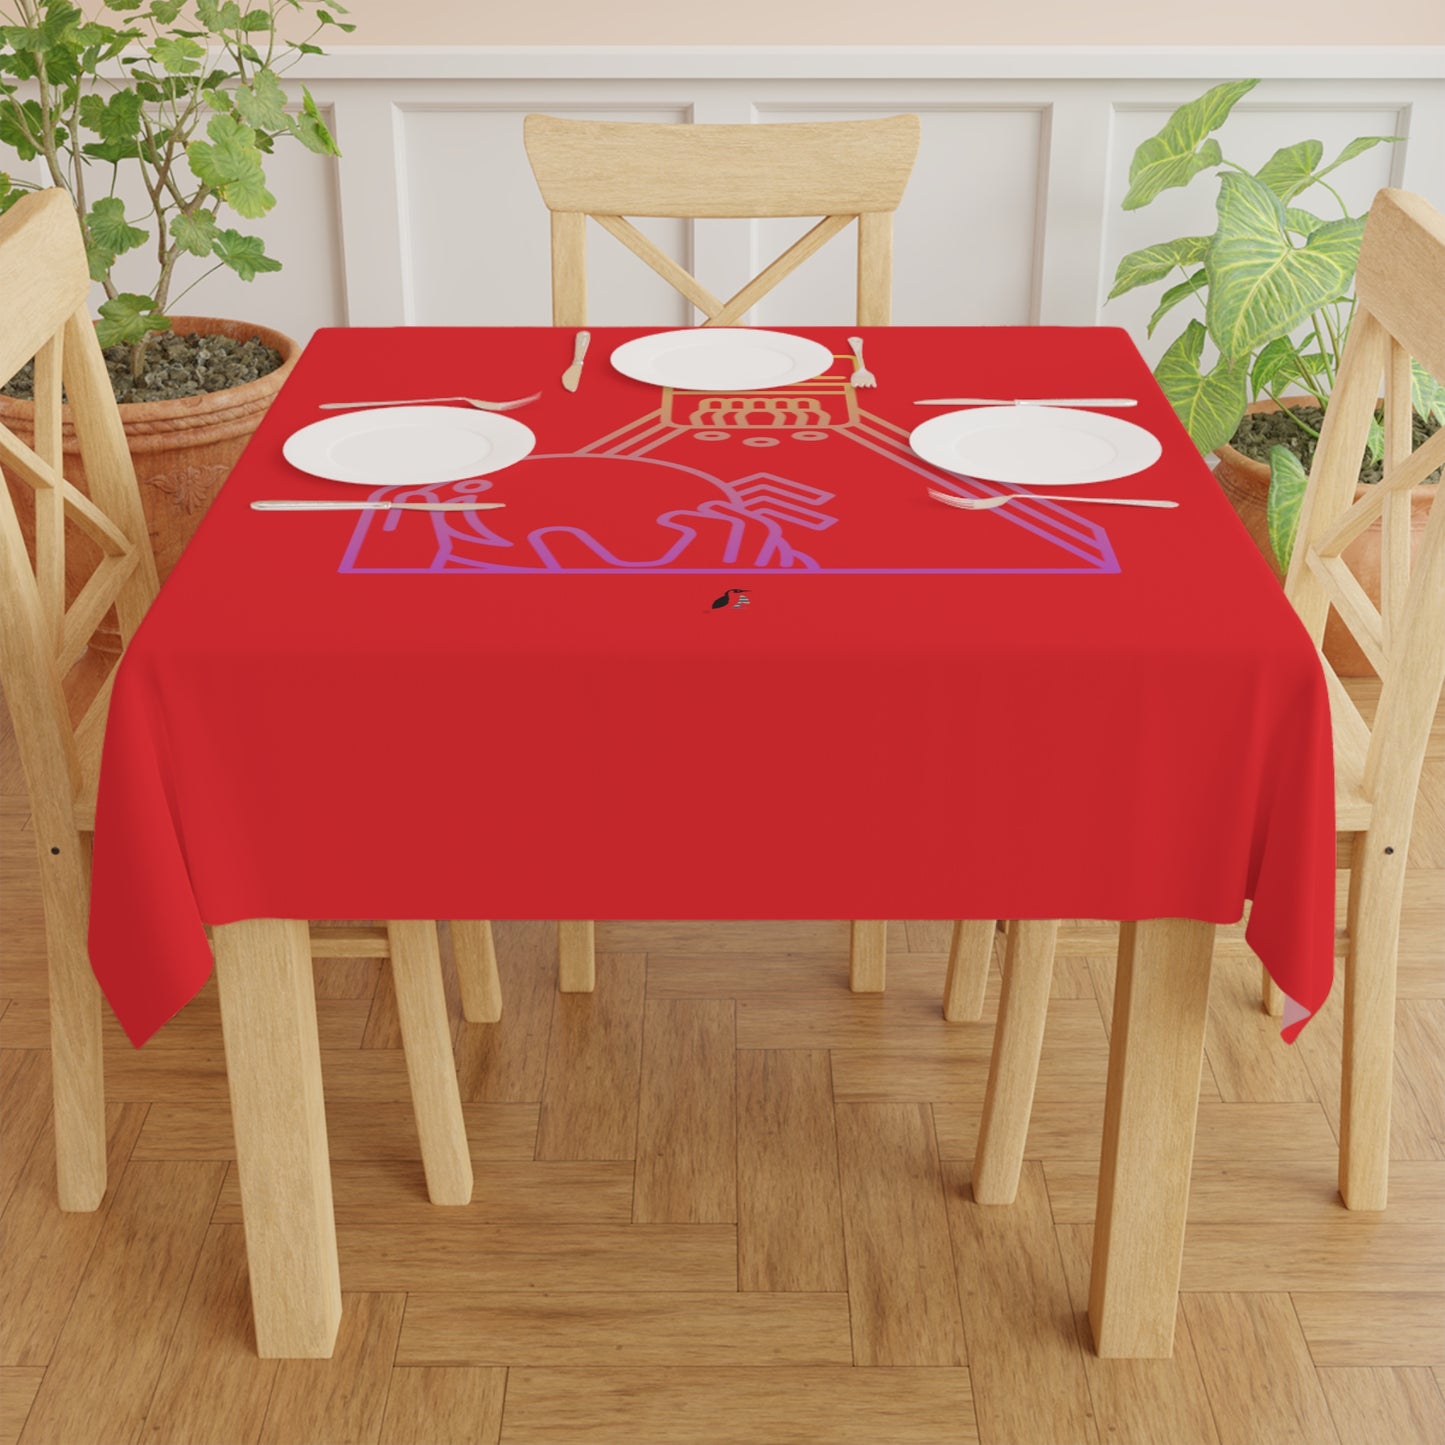 Tablecloth: Bowling Red